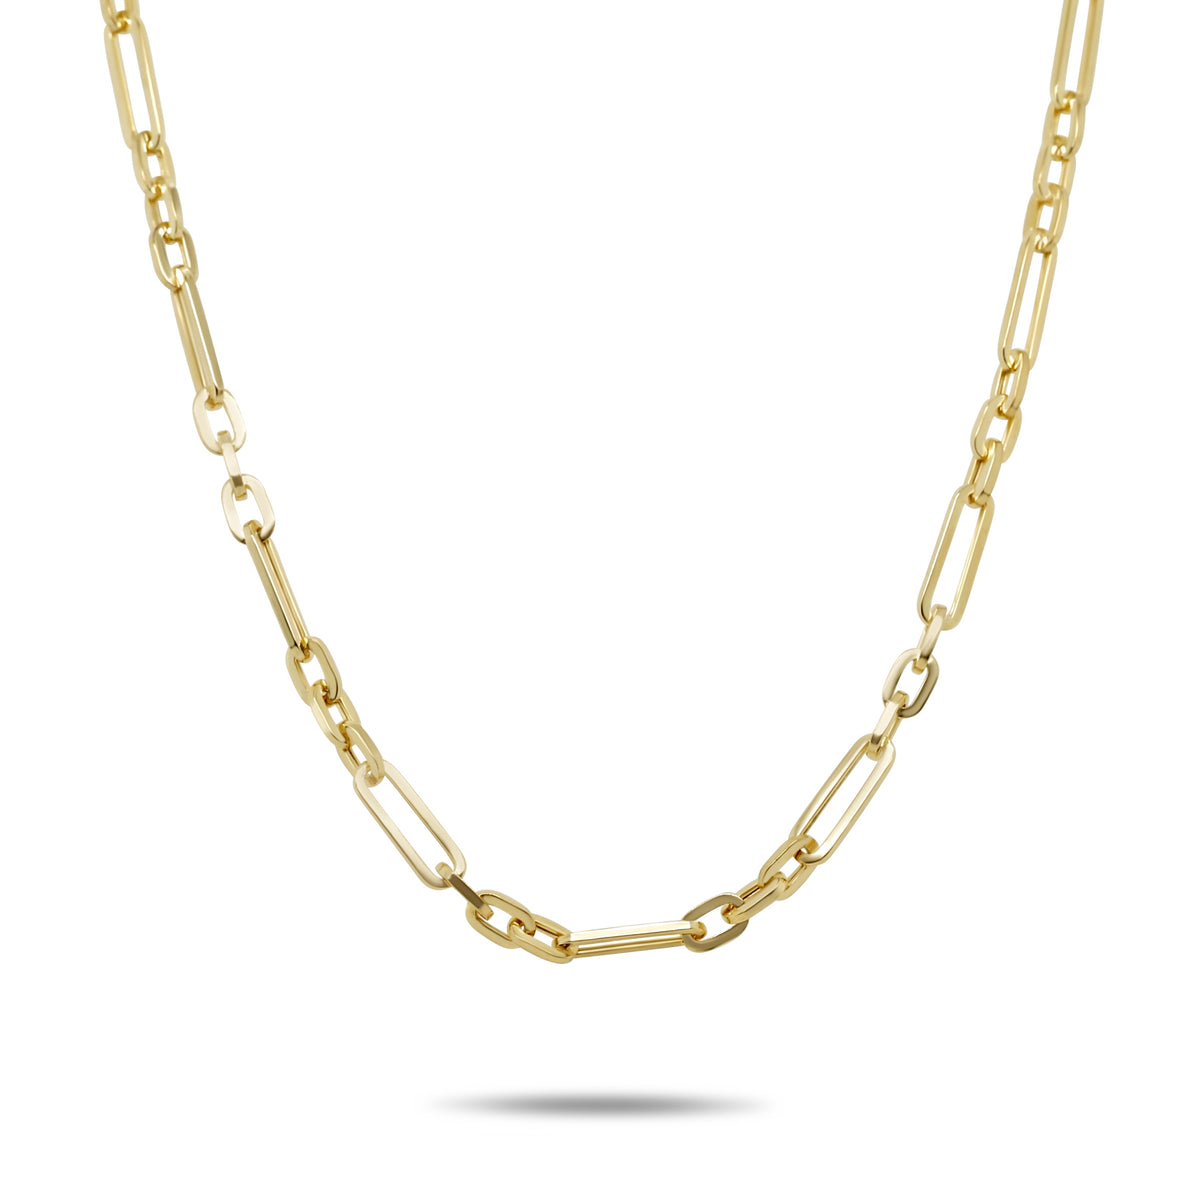 18 inch plain 14k yellow gold alternating chain necklace